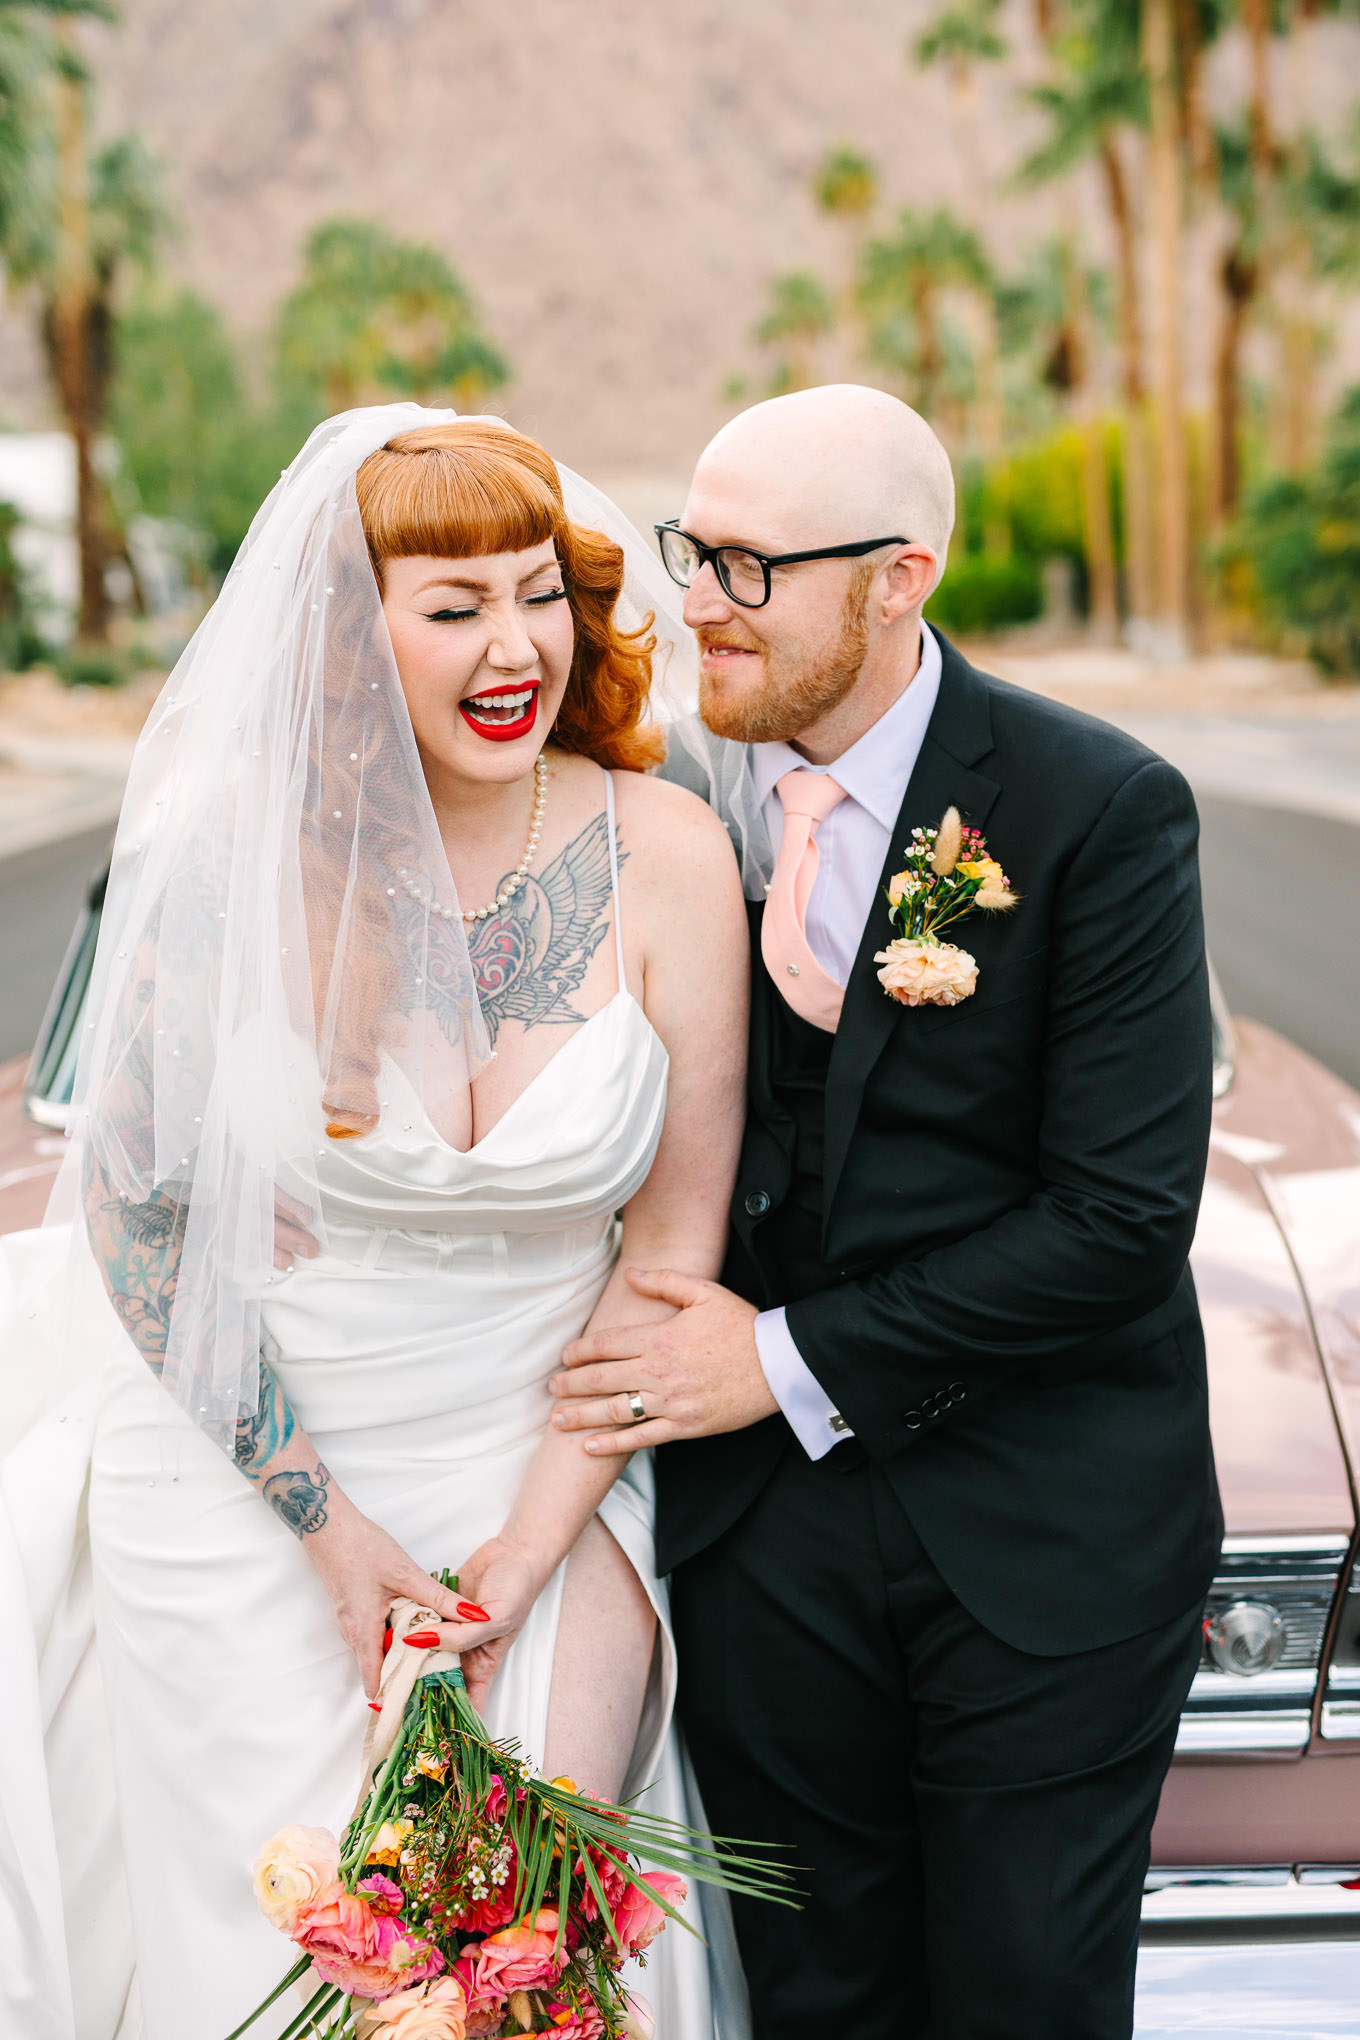 Palm Springs micro wedding with pink car | Wedding and elopement photography roundup | Los Angeles and Palm Springs photographer | #losangeleswedding #palmspringswedding #elopementphotographer Source: Mary Costa Photography | Los Angeles